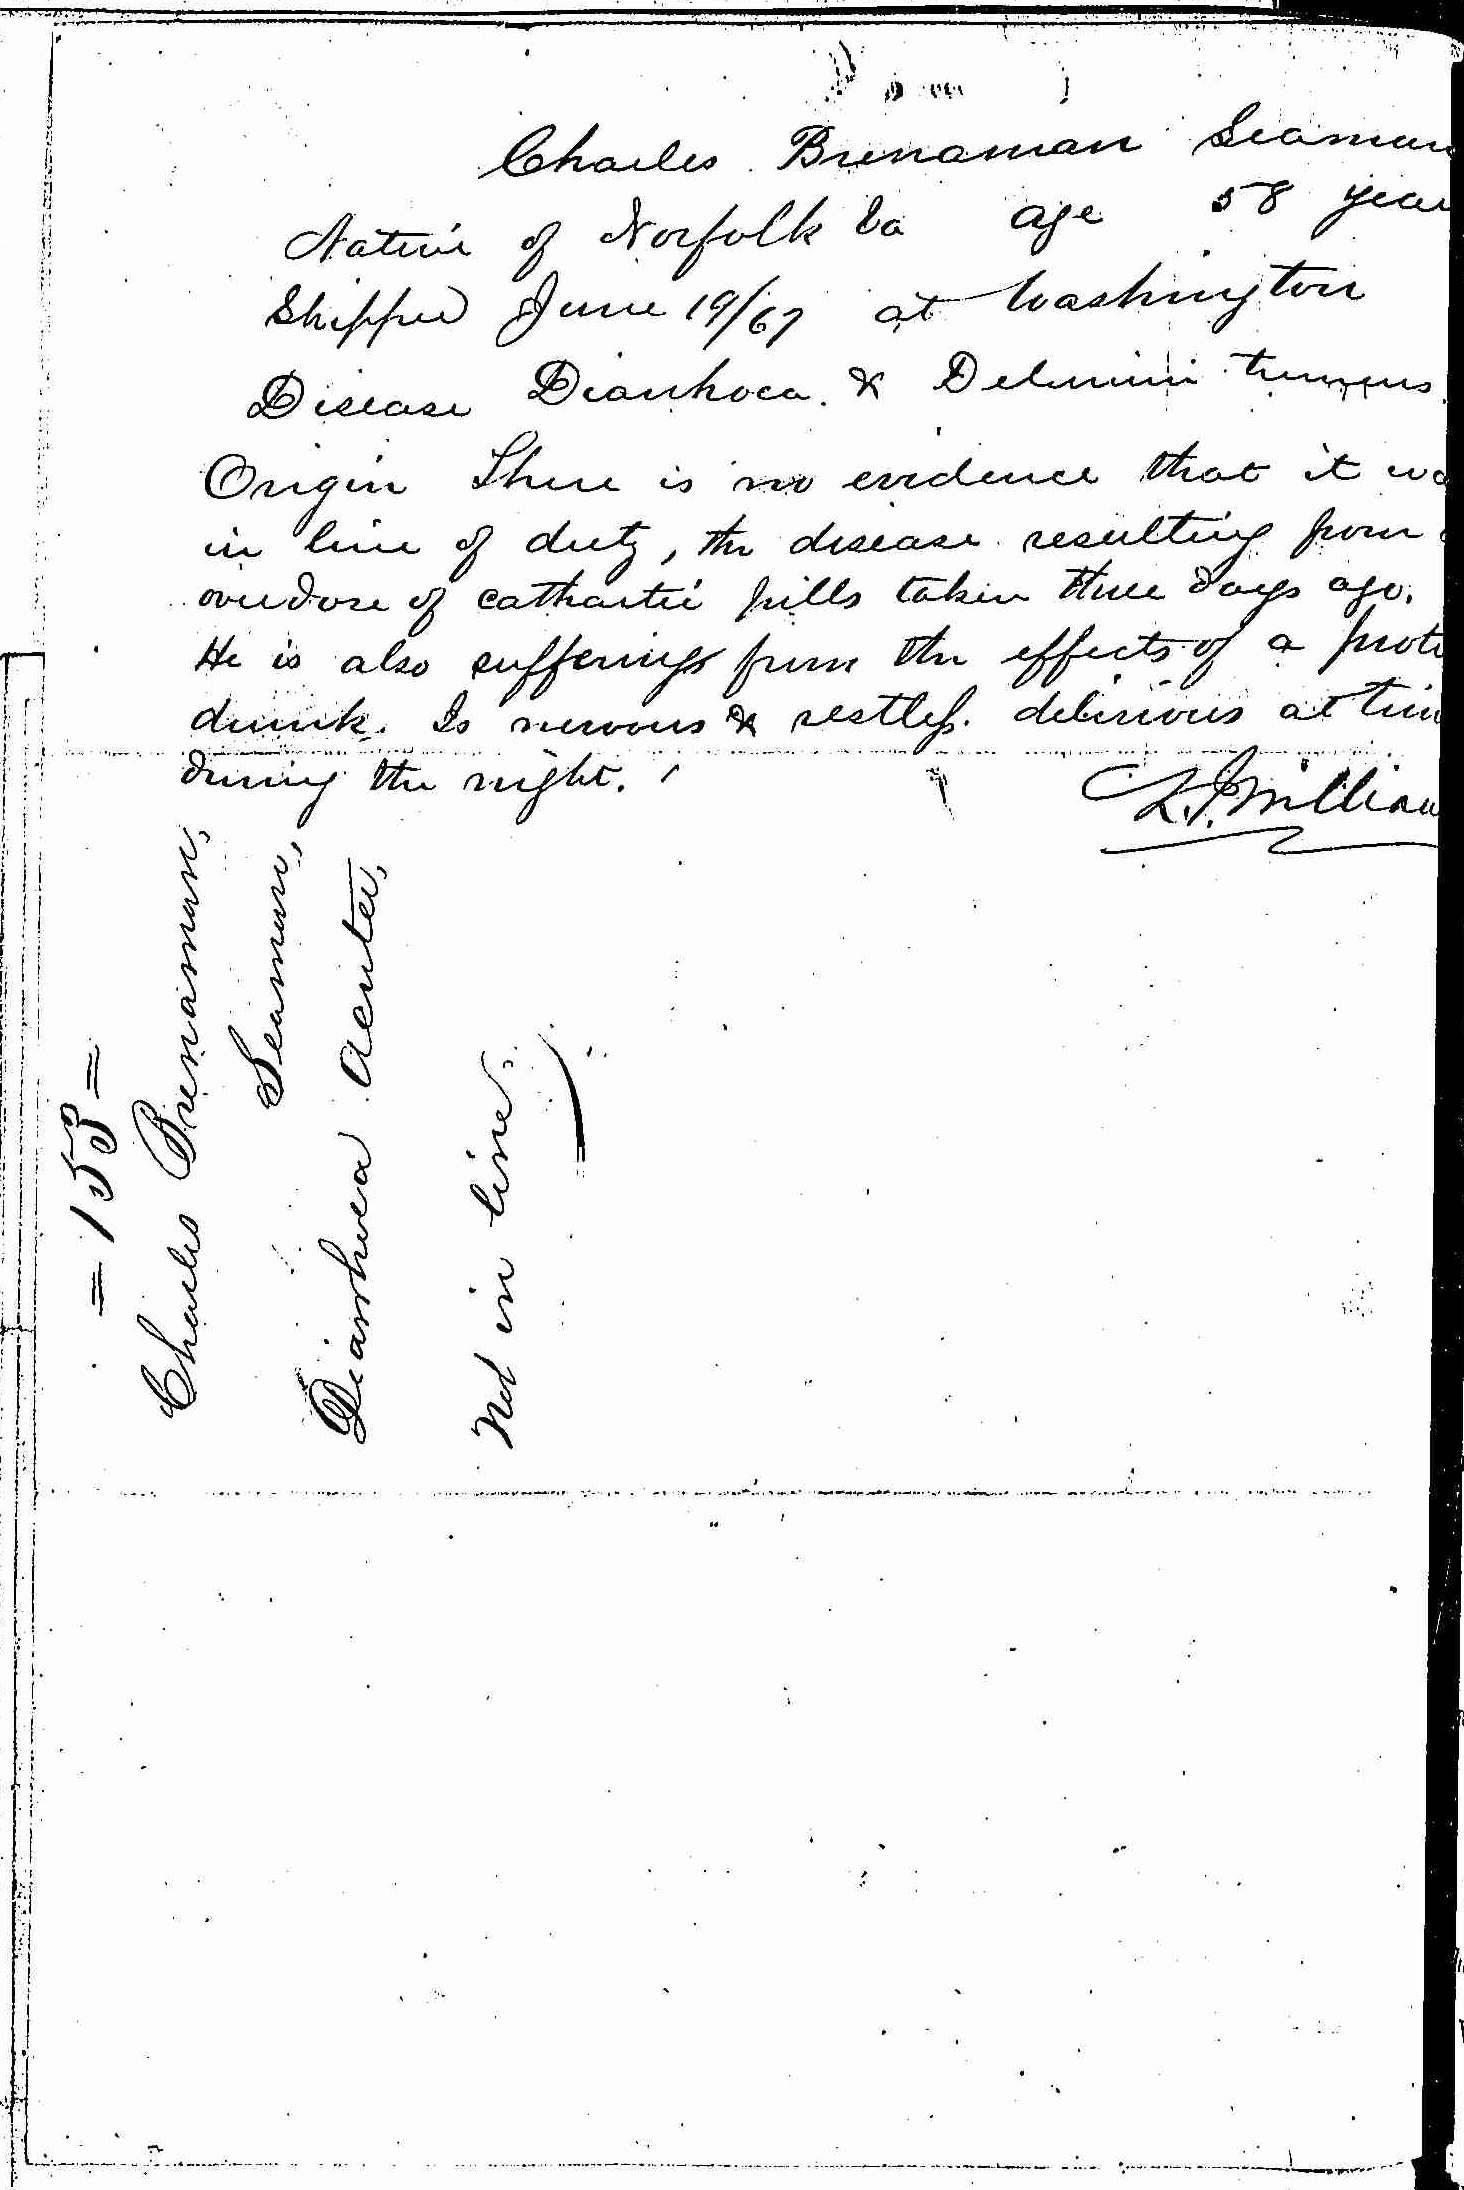 Entry for Charles Brenaman (page 2 of 2) in the log Hospital Tickets and Case Papers - Naval Hospital - Washington, D.C. - 1866-68